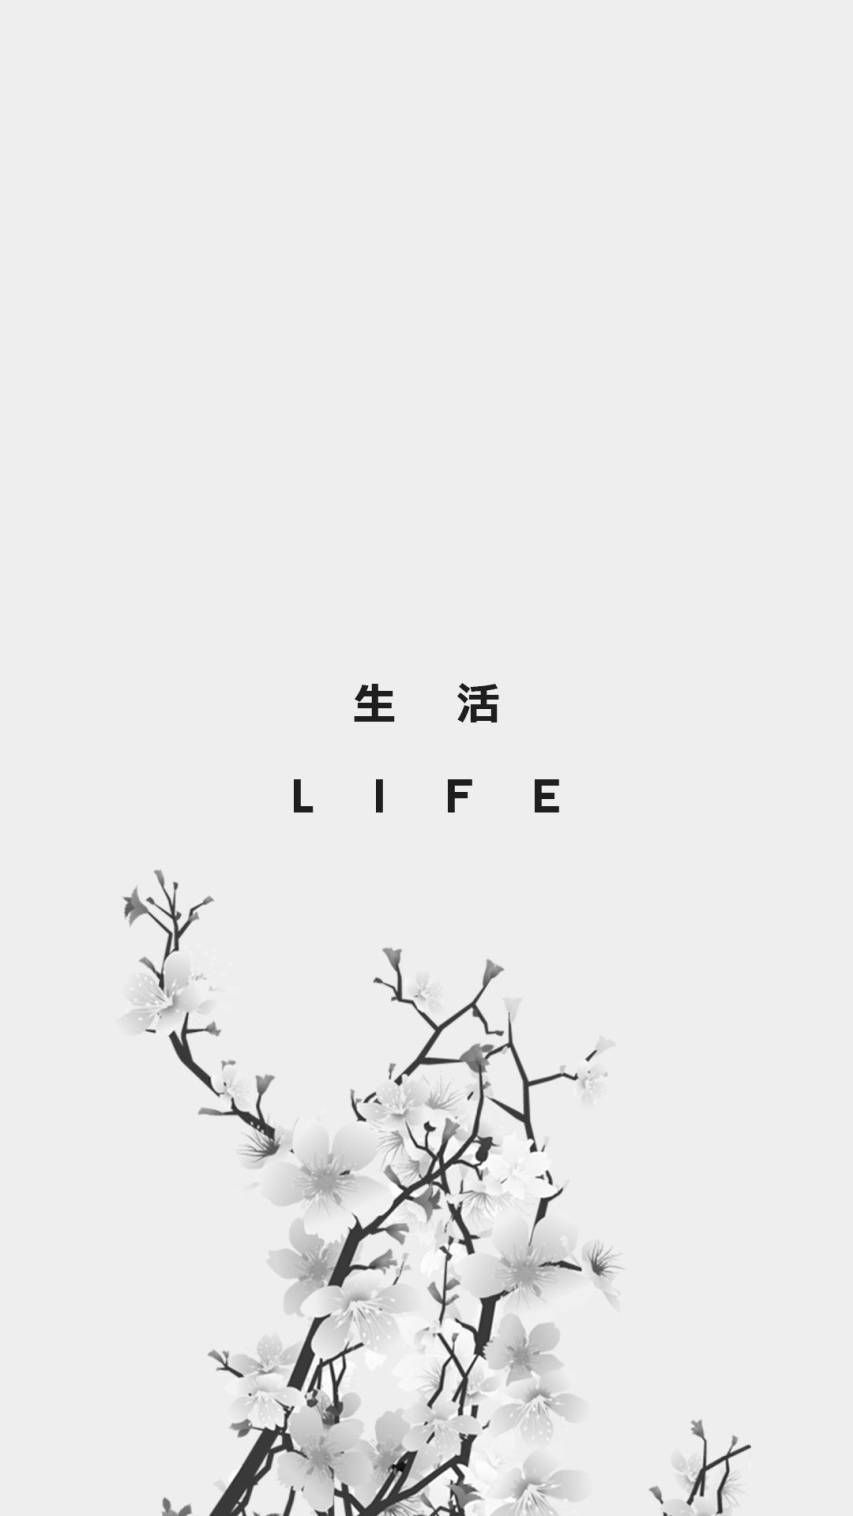 A tree with branches and the word life - Landscape, depression